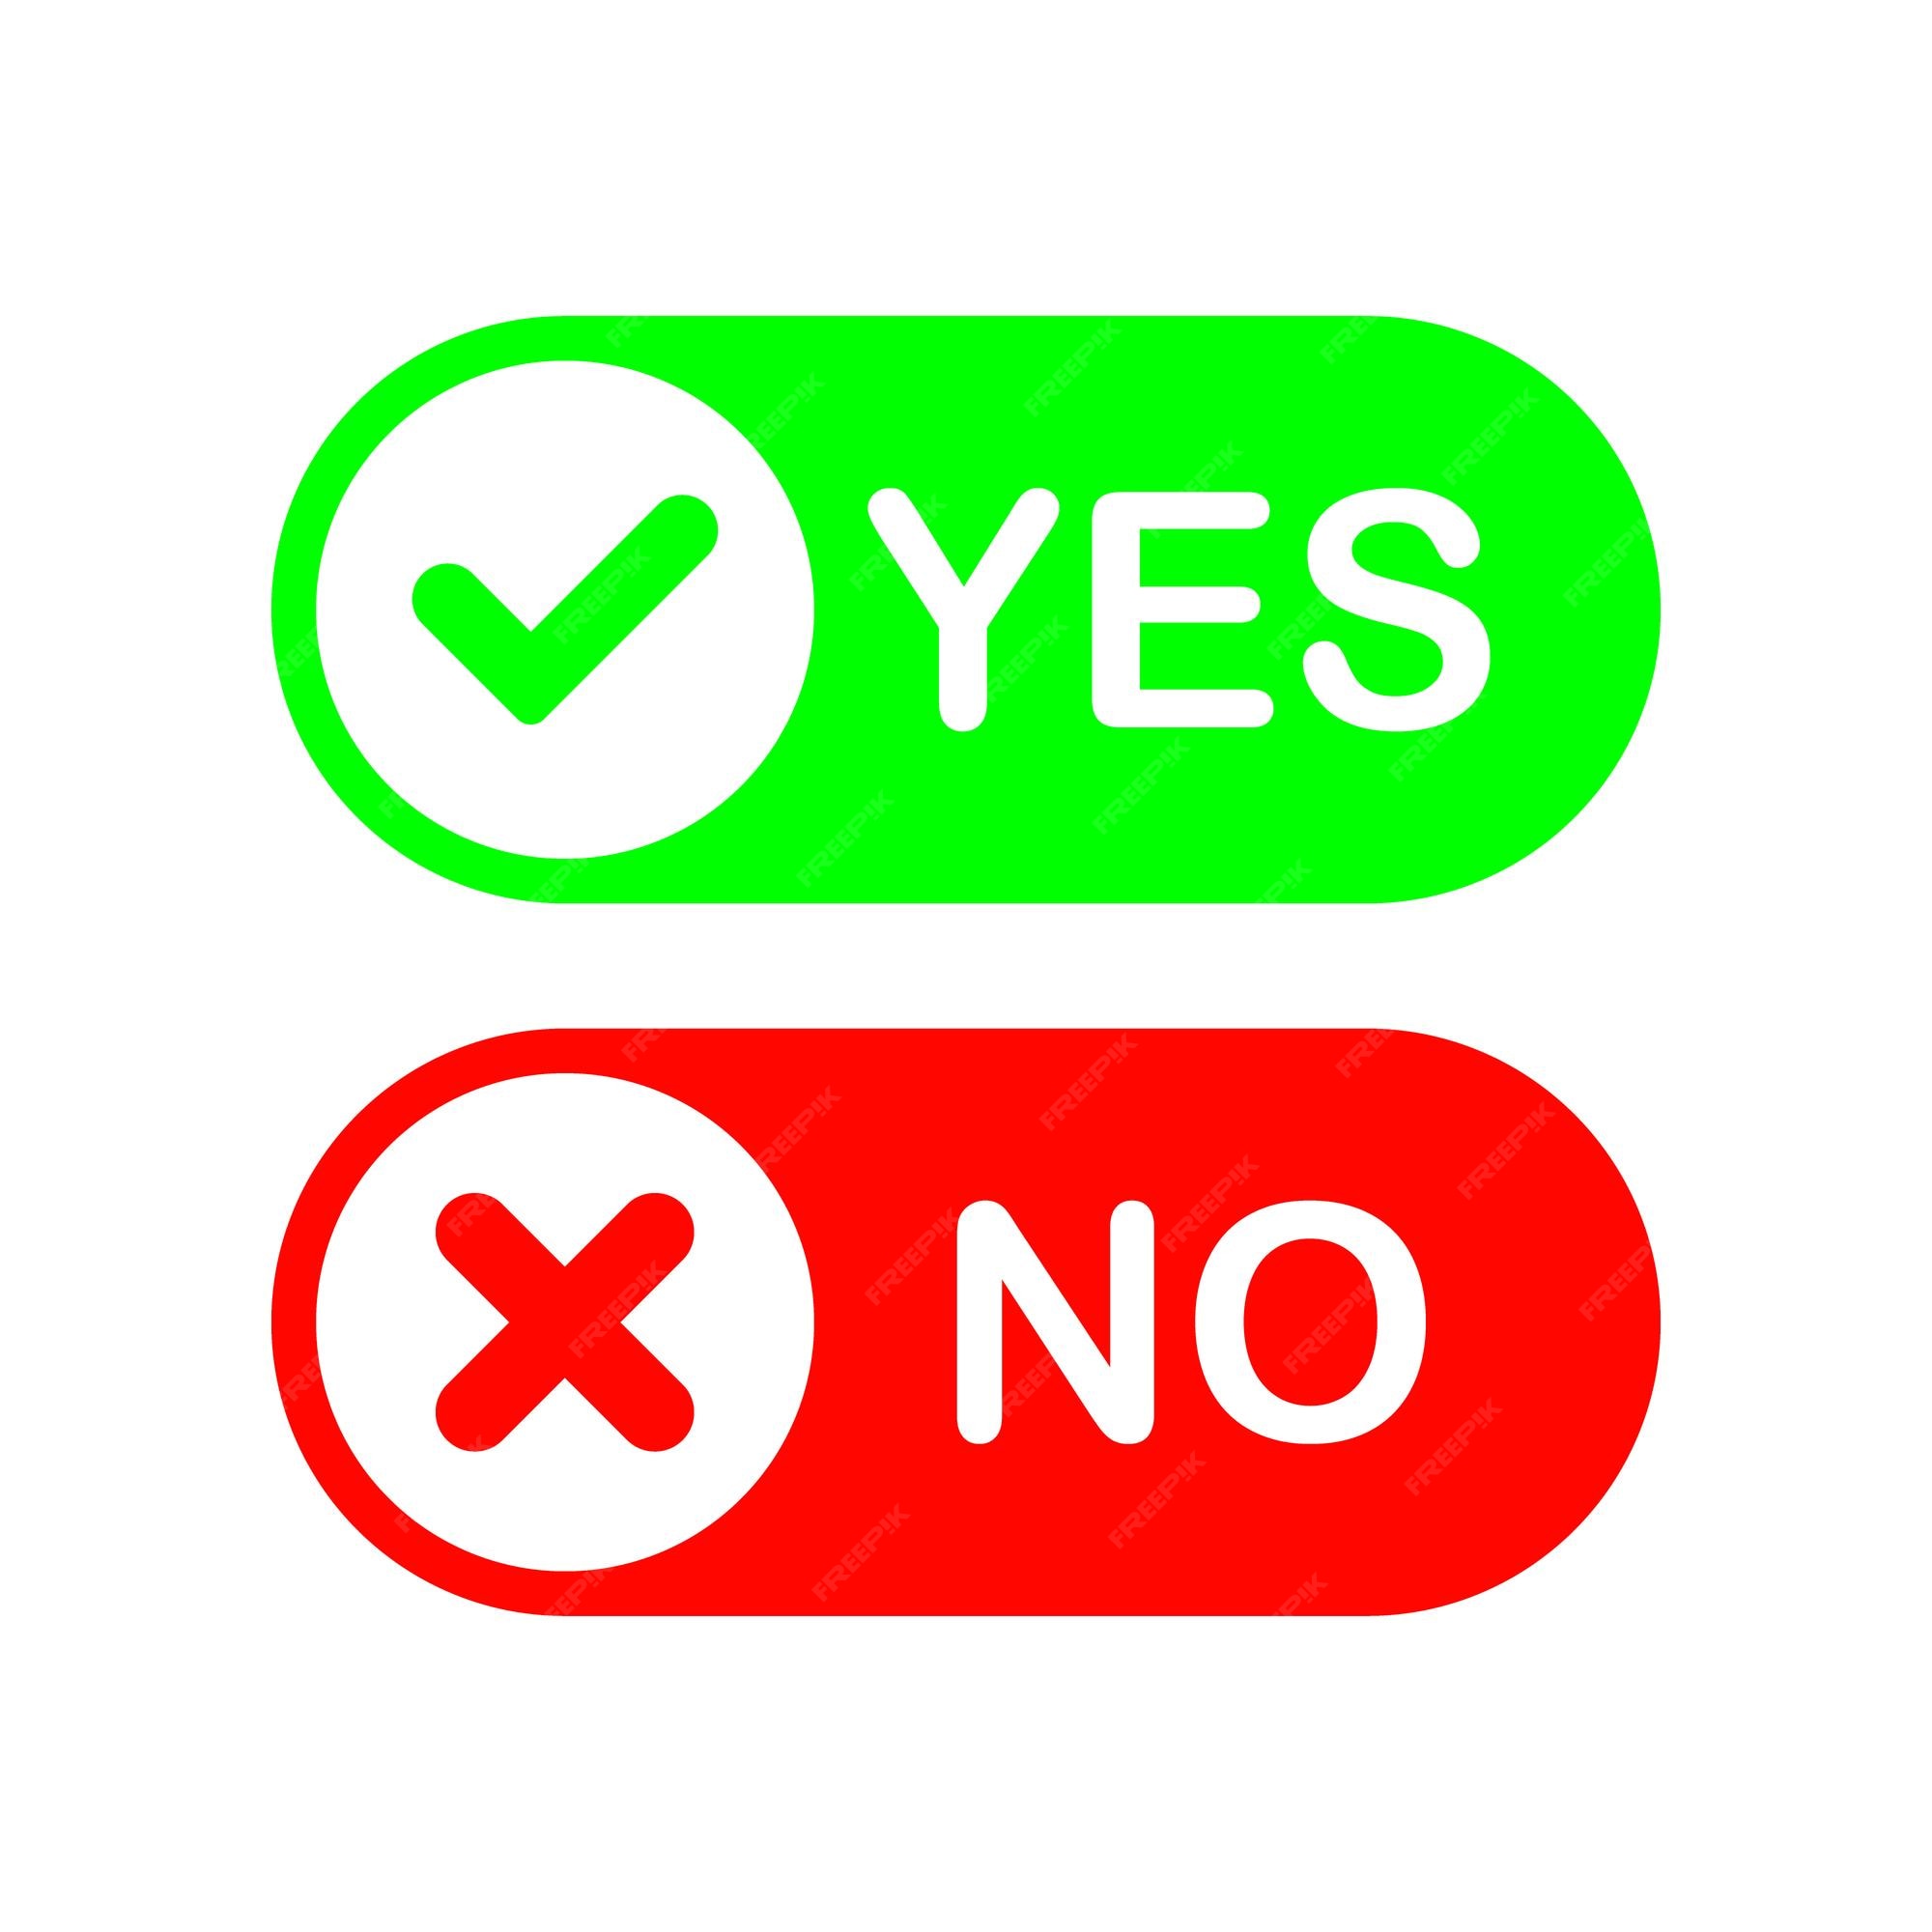 Premium Vector | Yes and no toggle switch button icon